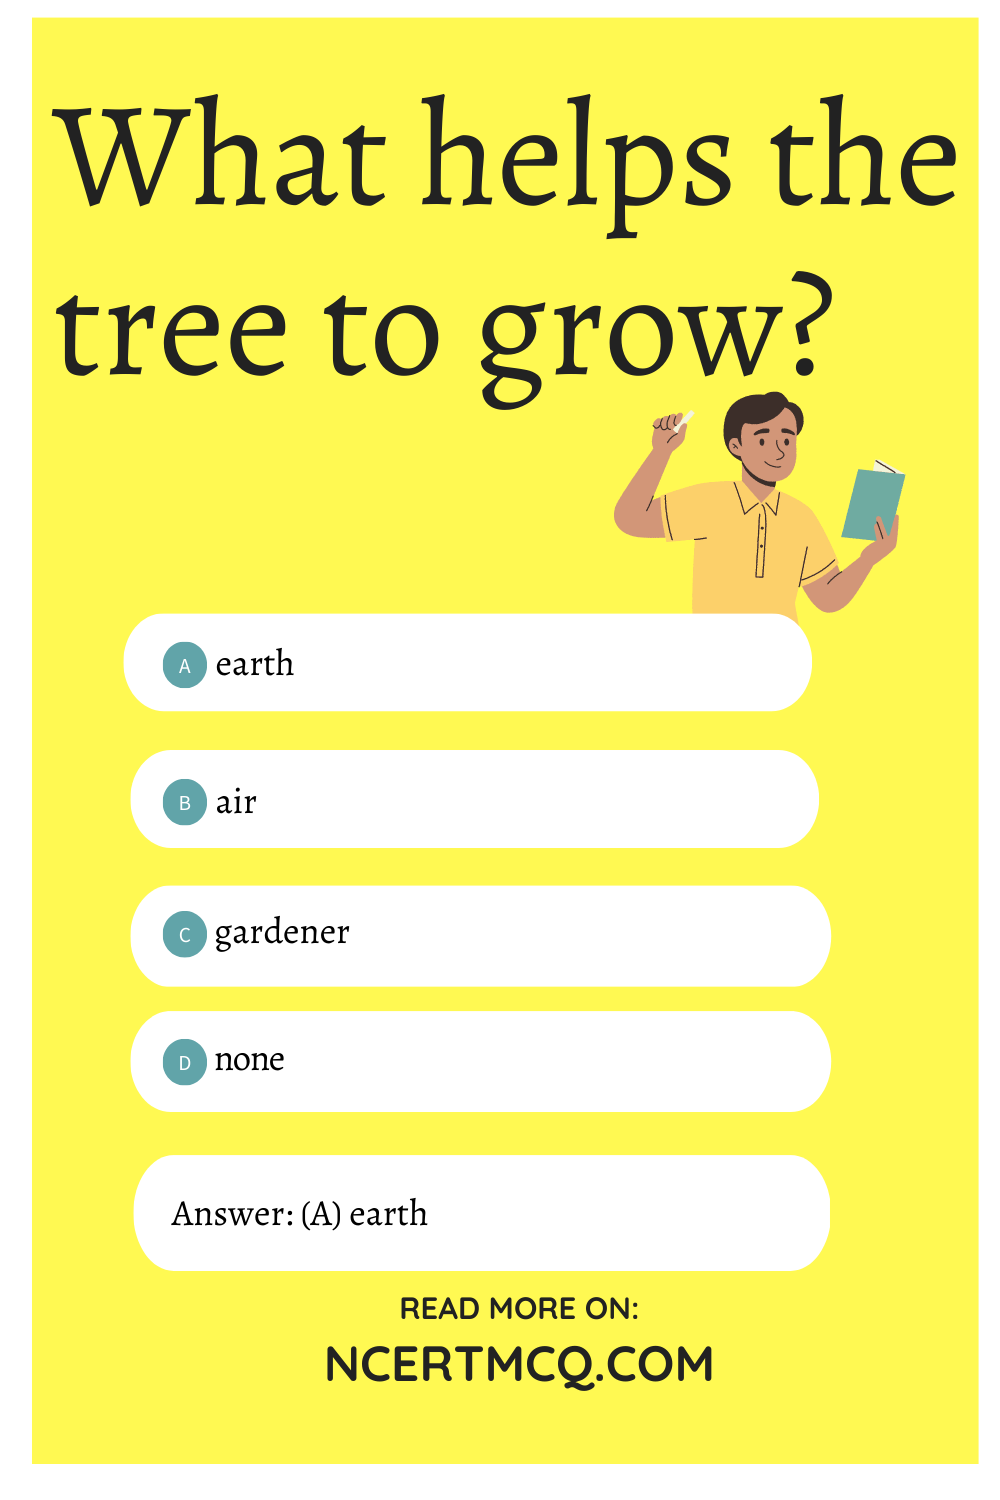 What helps the tree to grow?